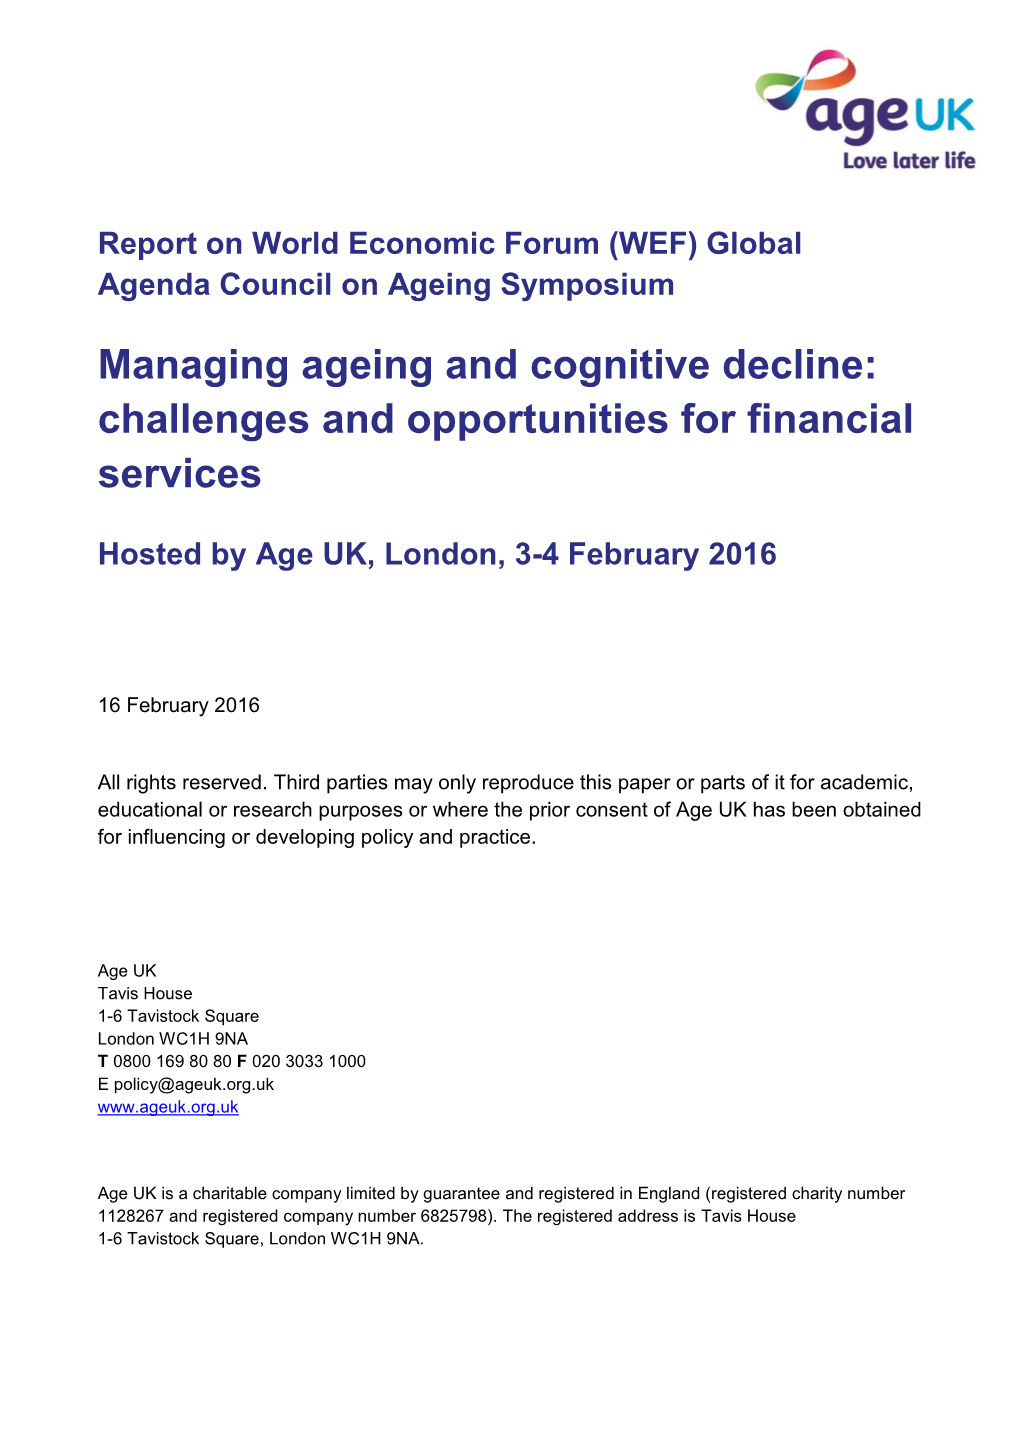 Managing Ageing and Cognitive Decline: Challenges and Opportunities for Financial Services